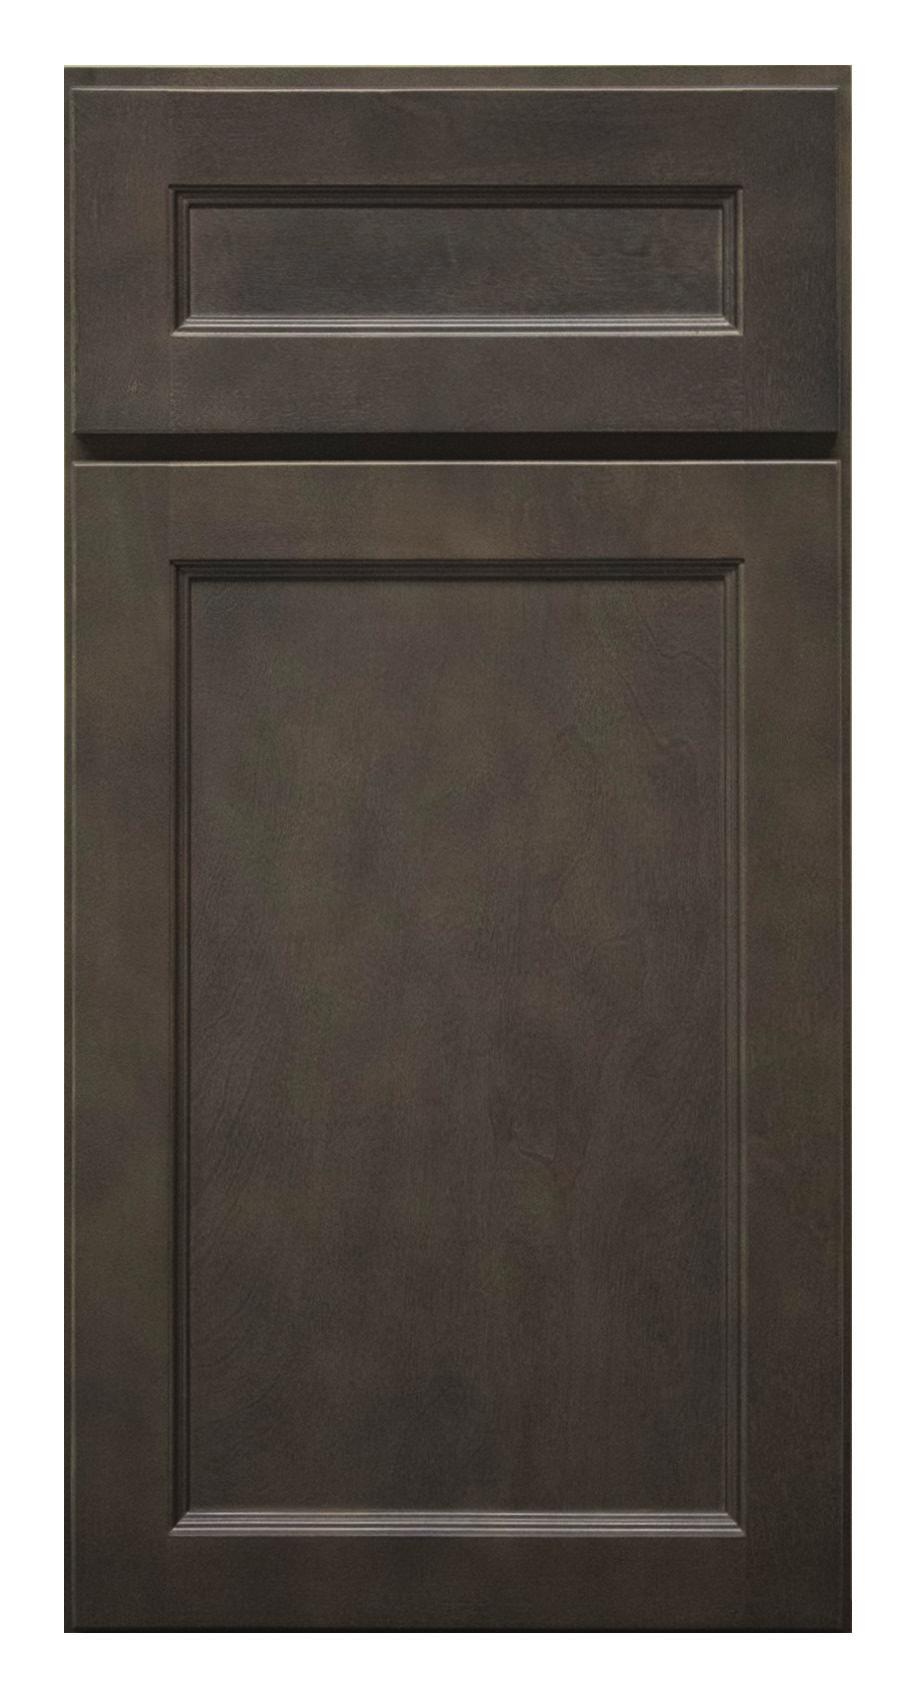 GRAPHITE Enjoy the beauty of natural wood grain in our newest Choice Cabinet color Graphite.